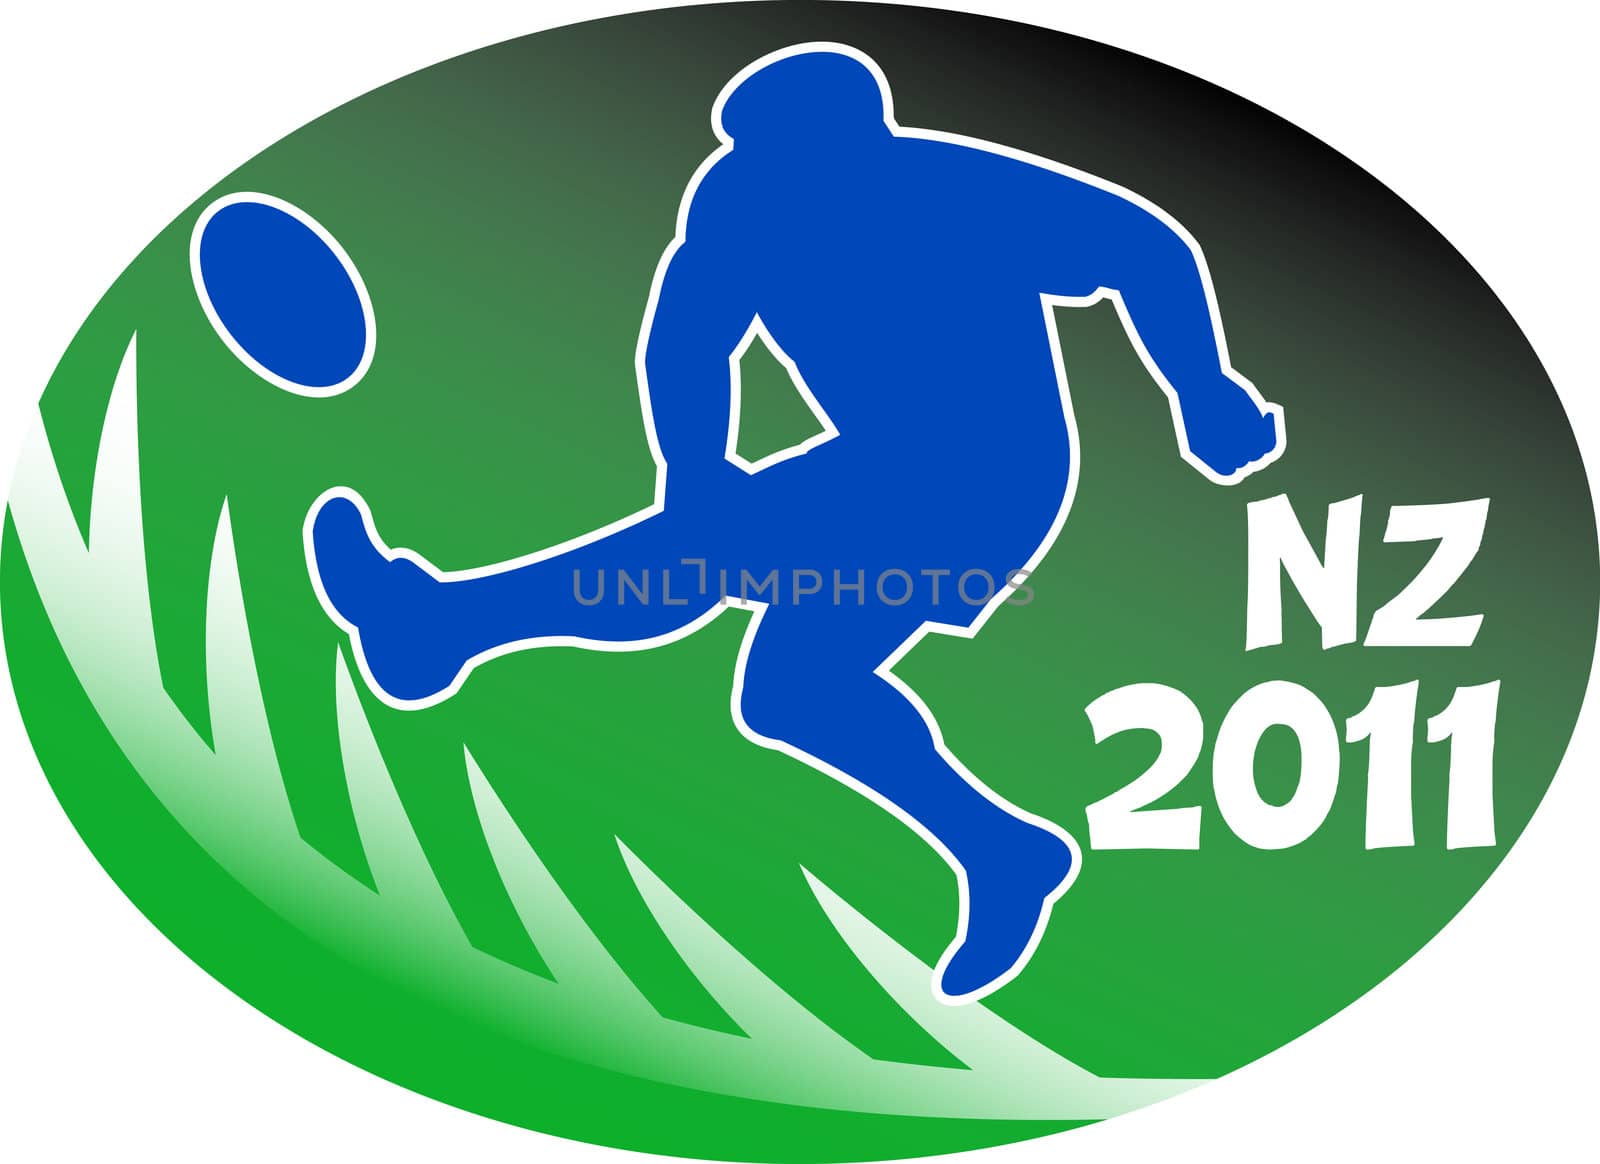 illustration of a rugby player kicking the ball side view set inside oval or ball with fern silhouette and words NZ 2011